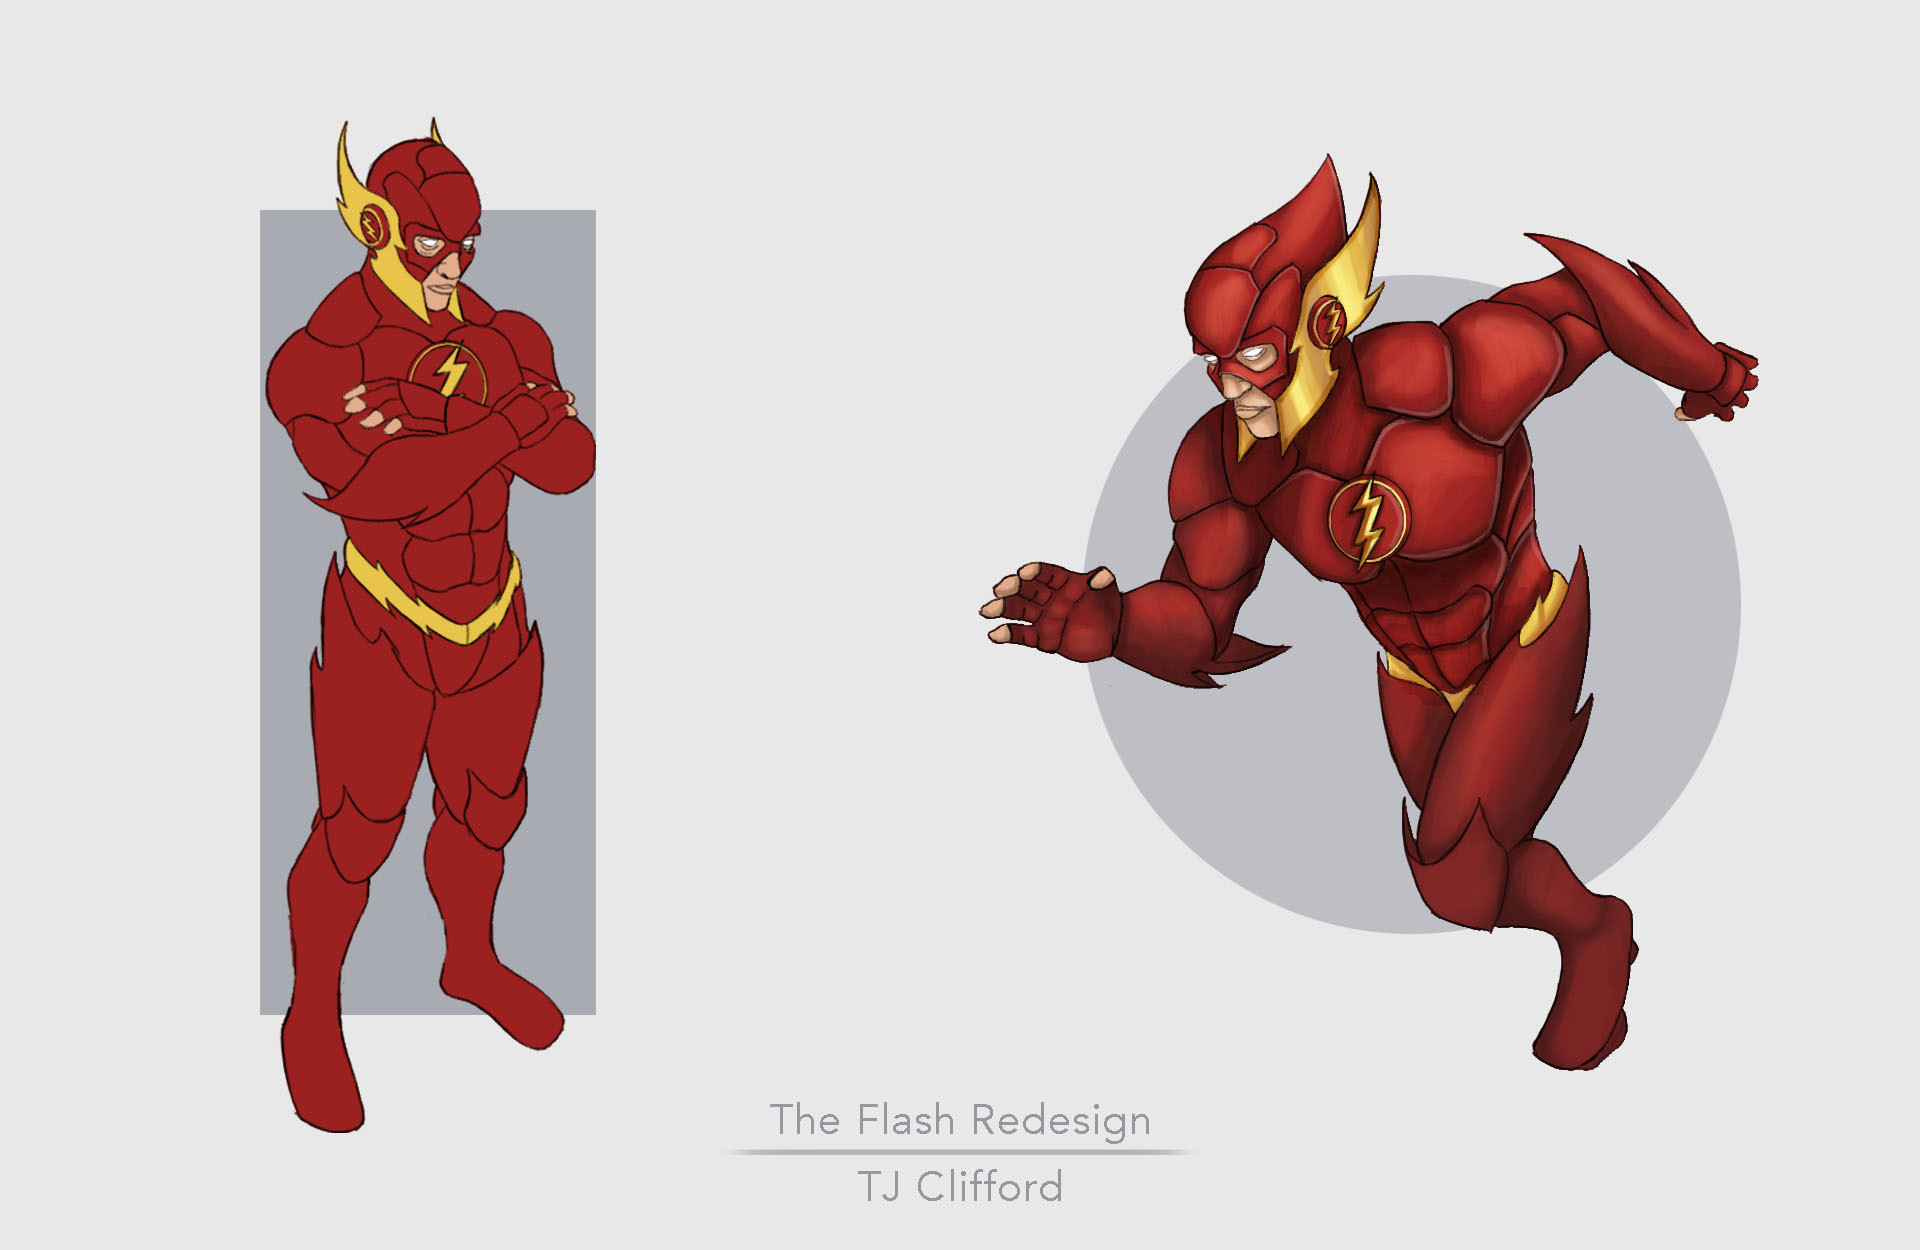 The Flash Redesign